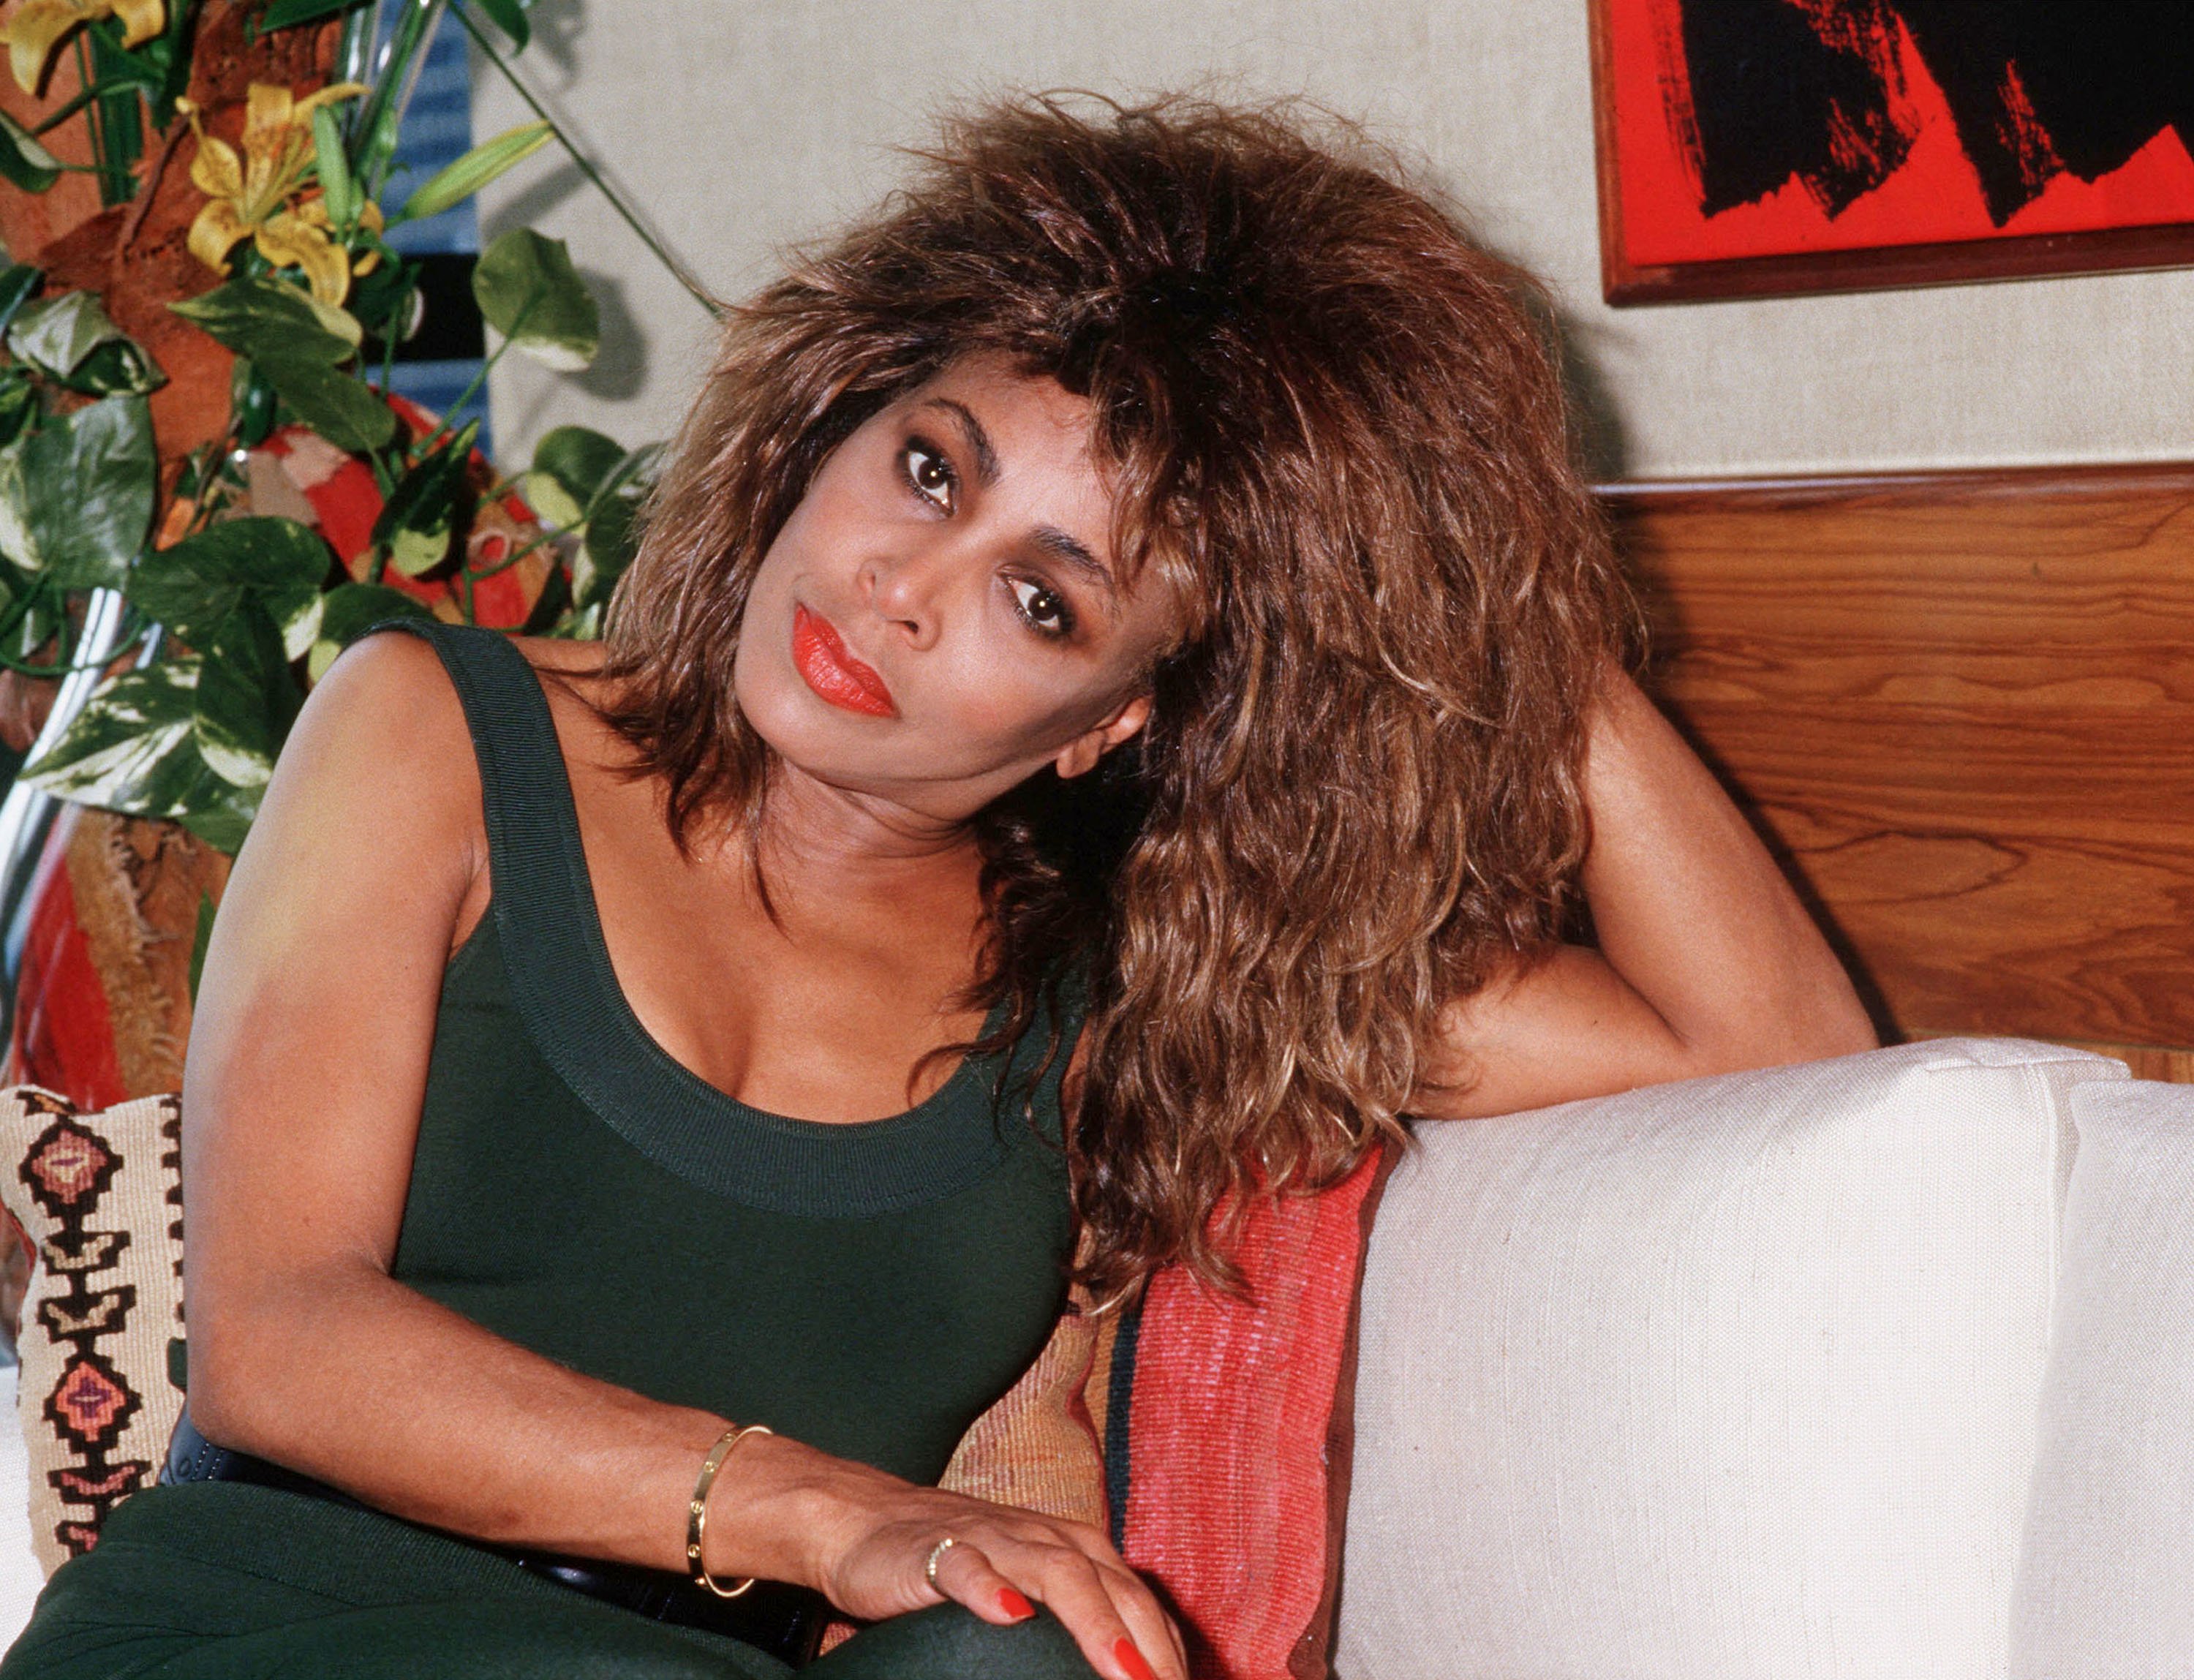 Tina Turner on a couch